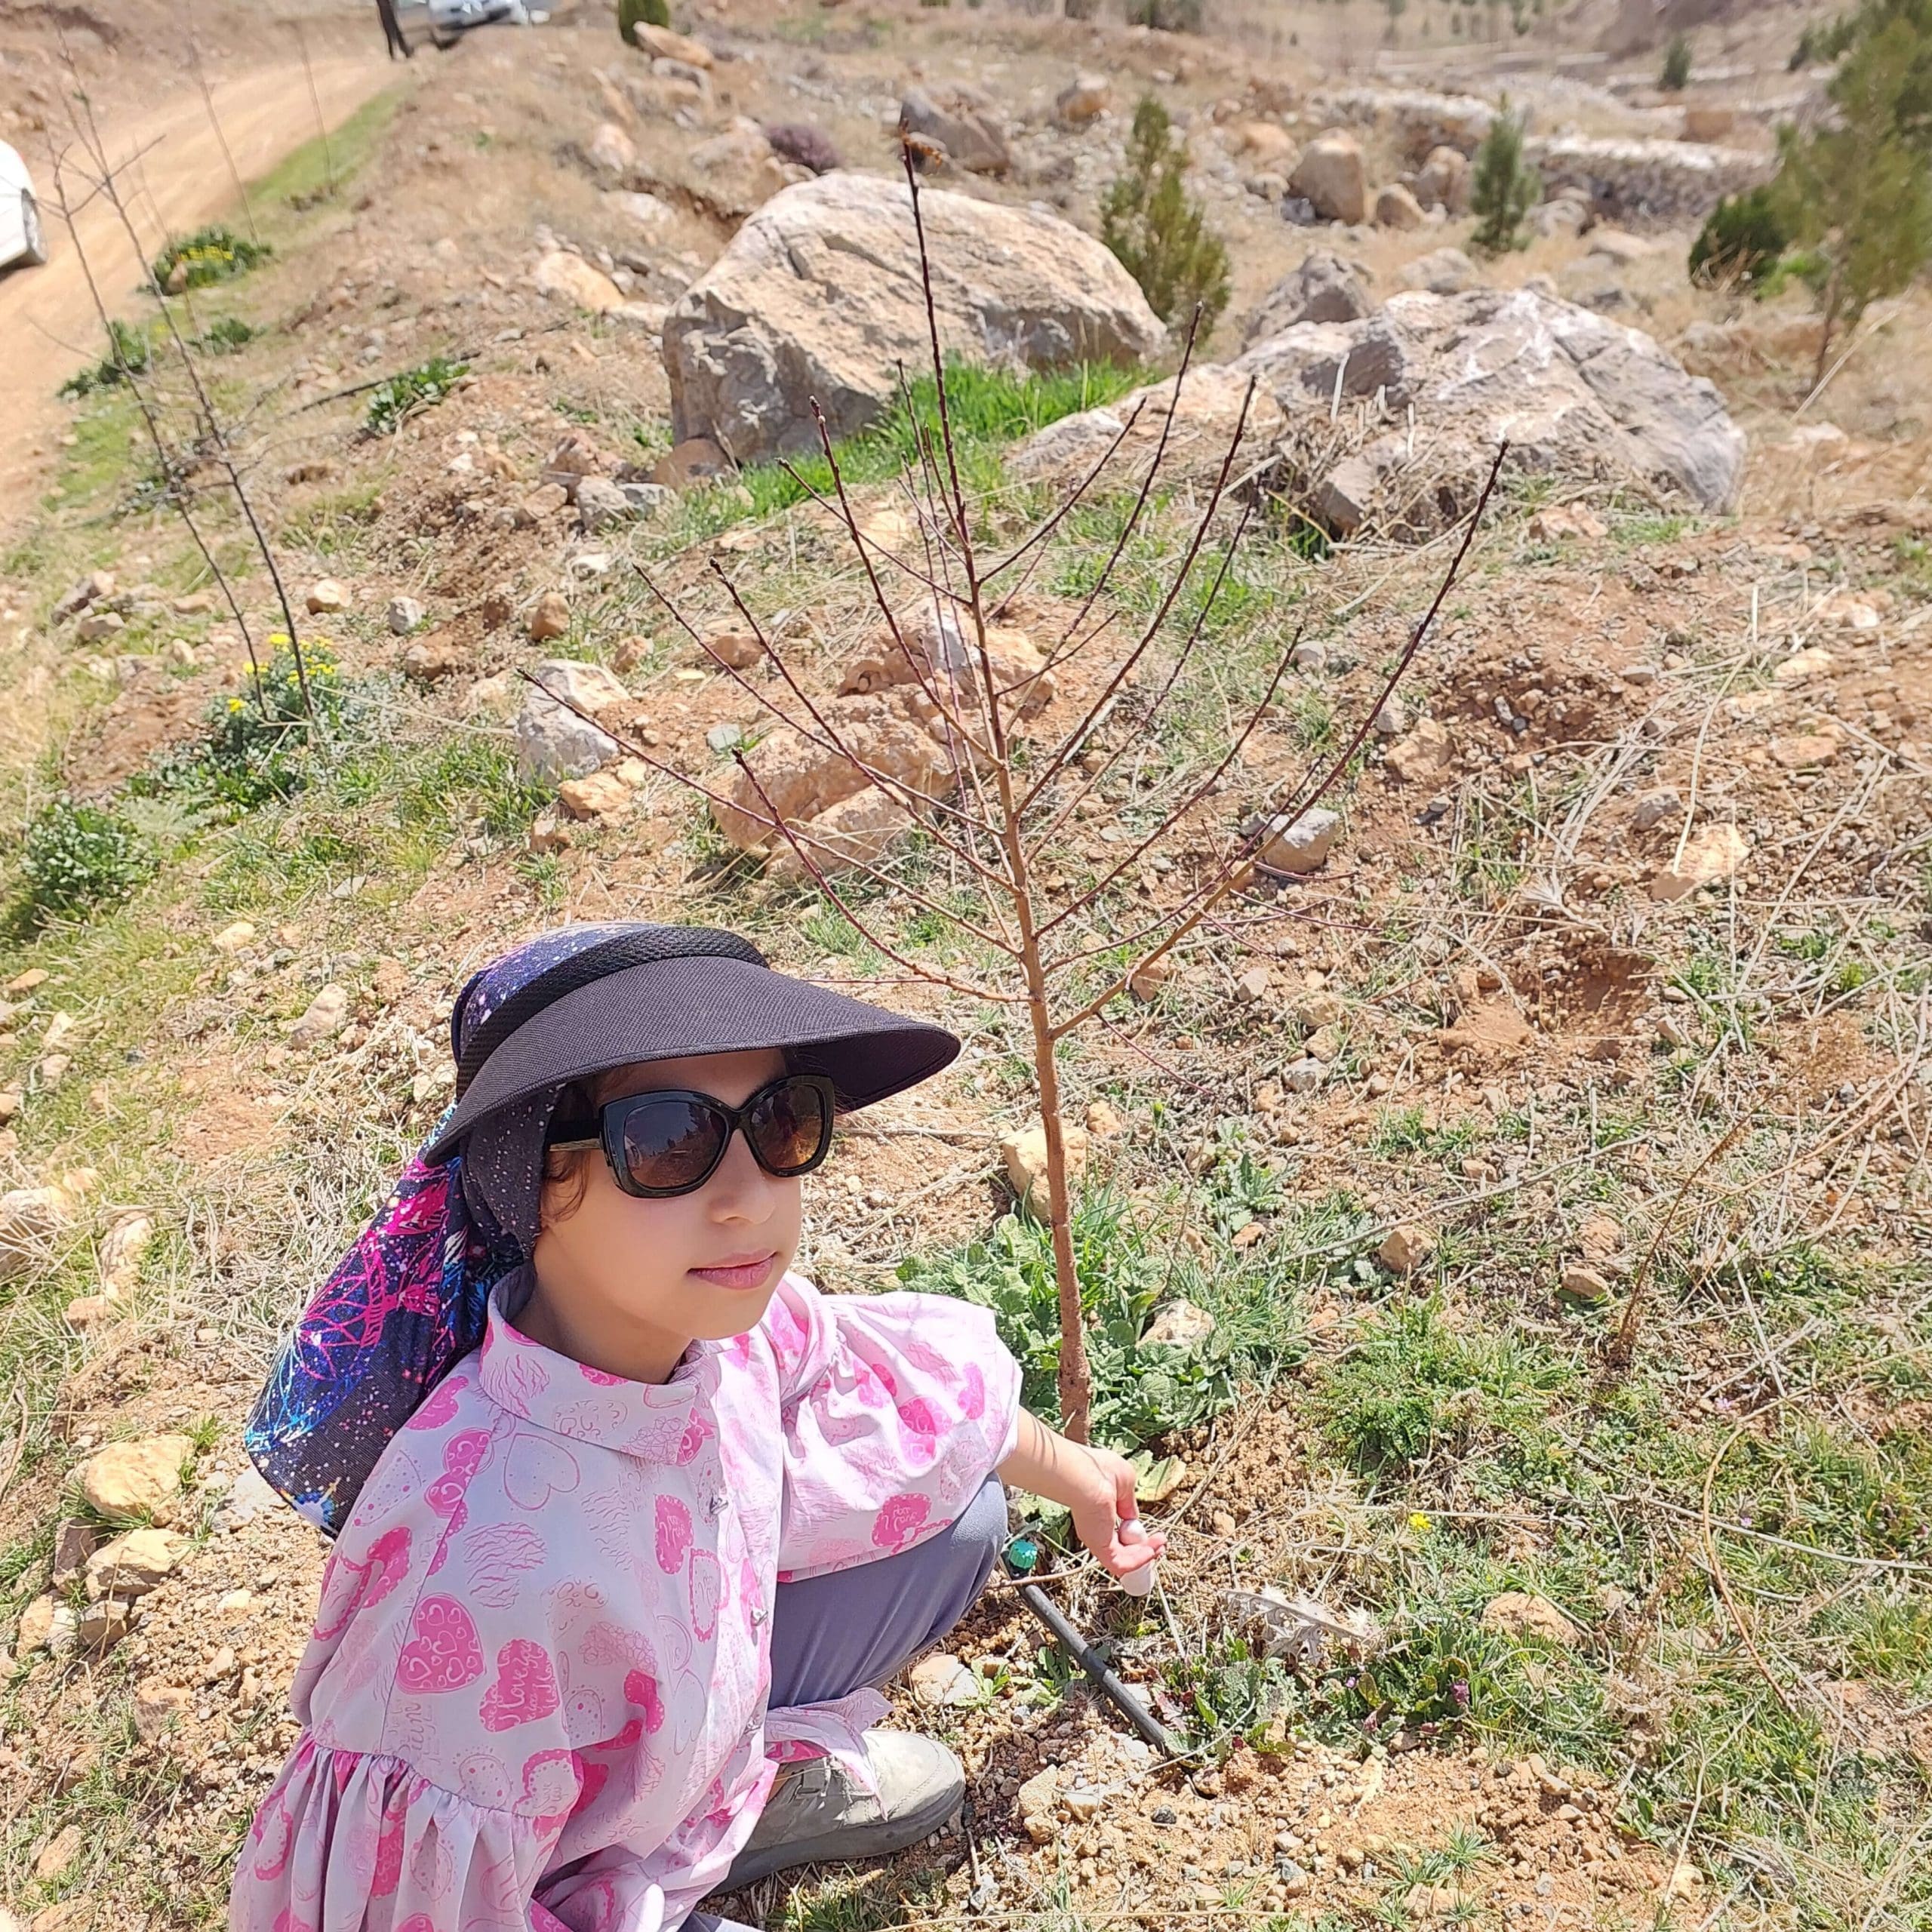 Photograph of the young ambassador for the environment, Baran Fateminejad, from Iran, age 9, planting a tree.